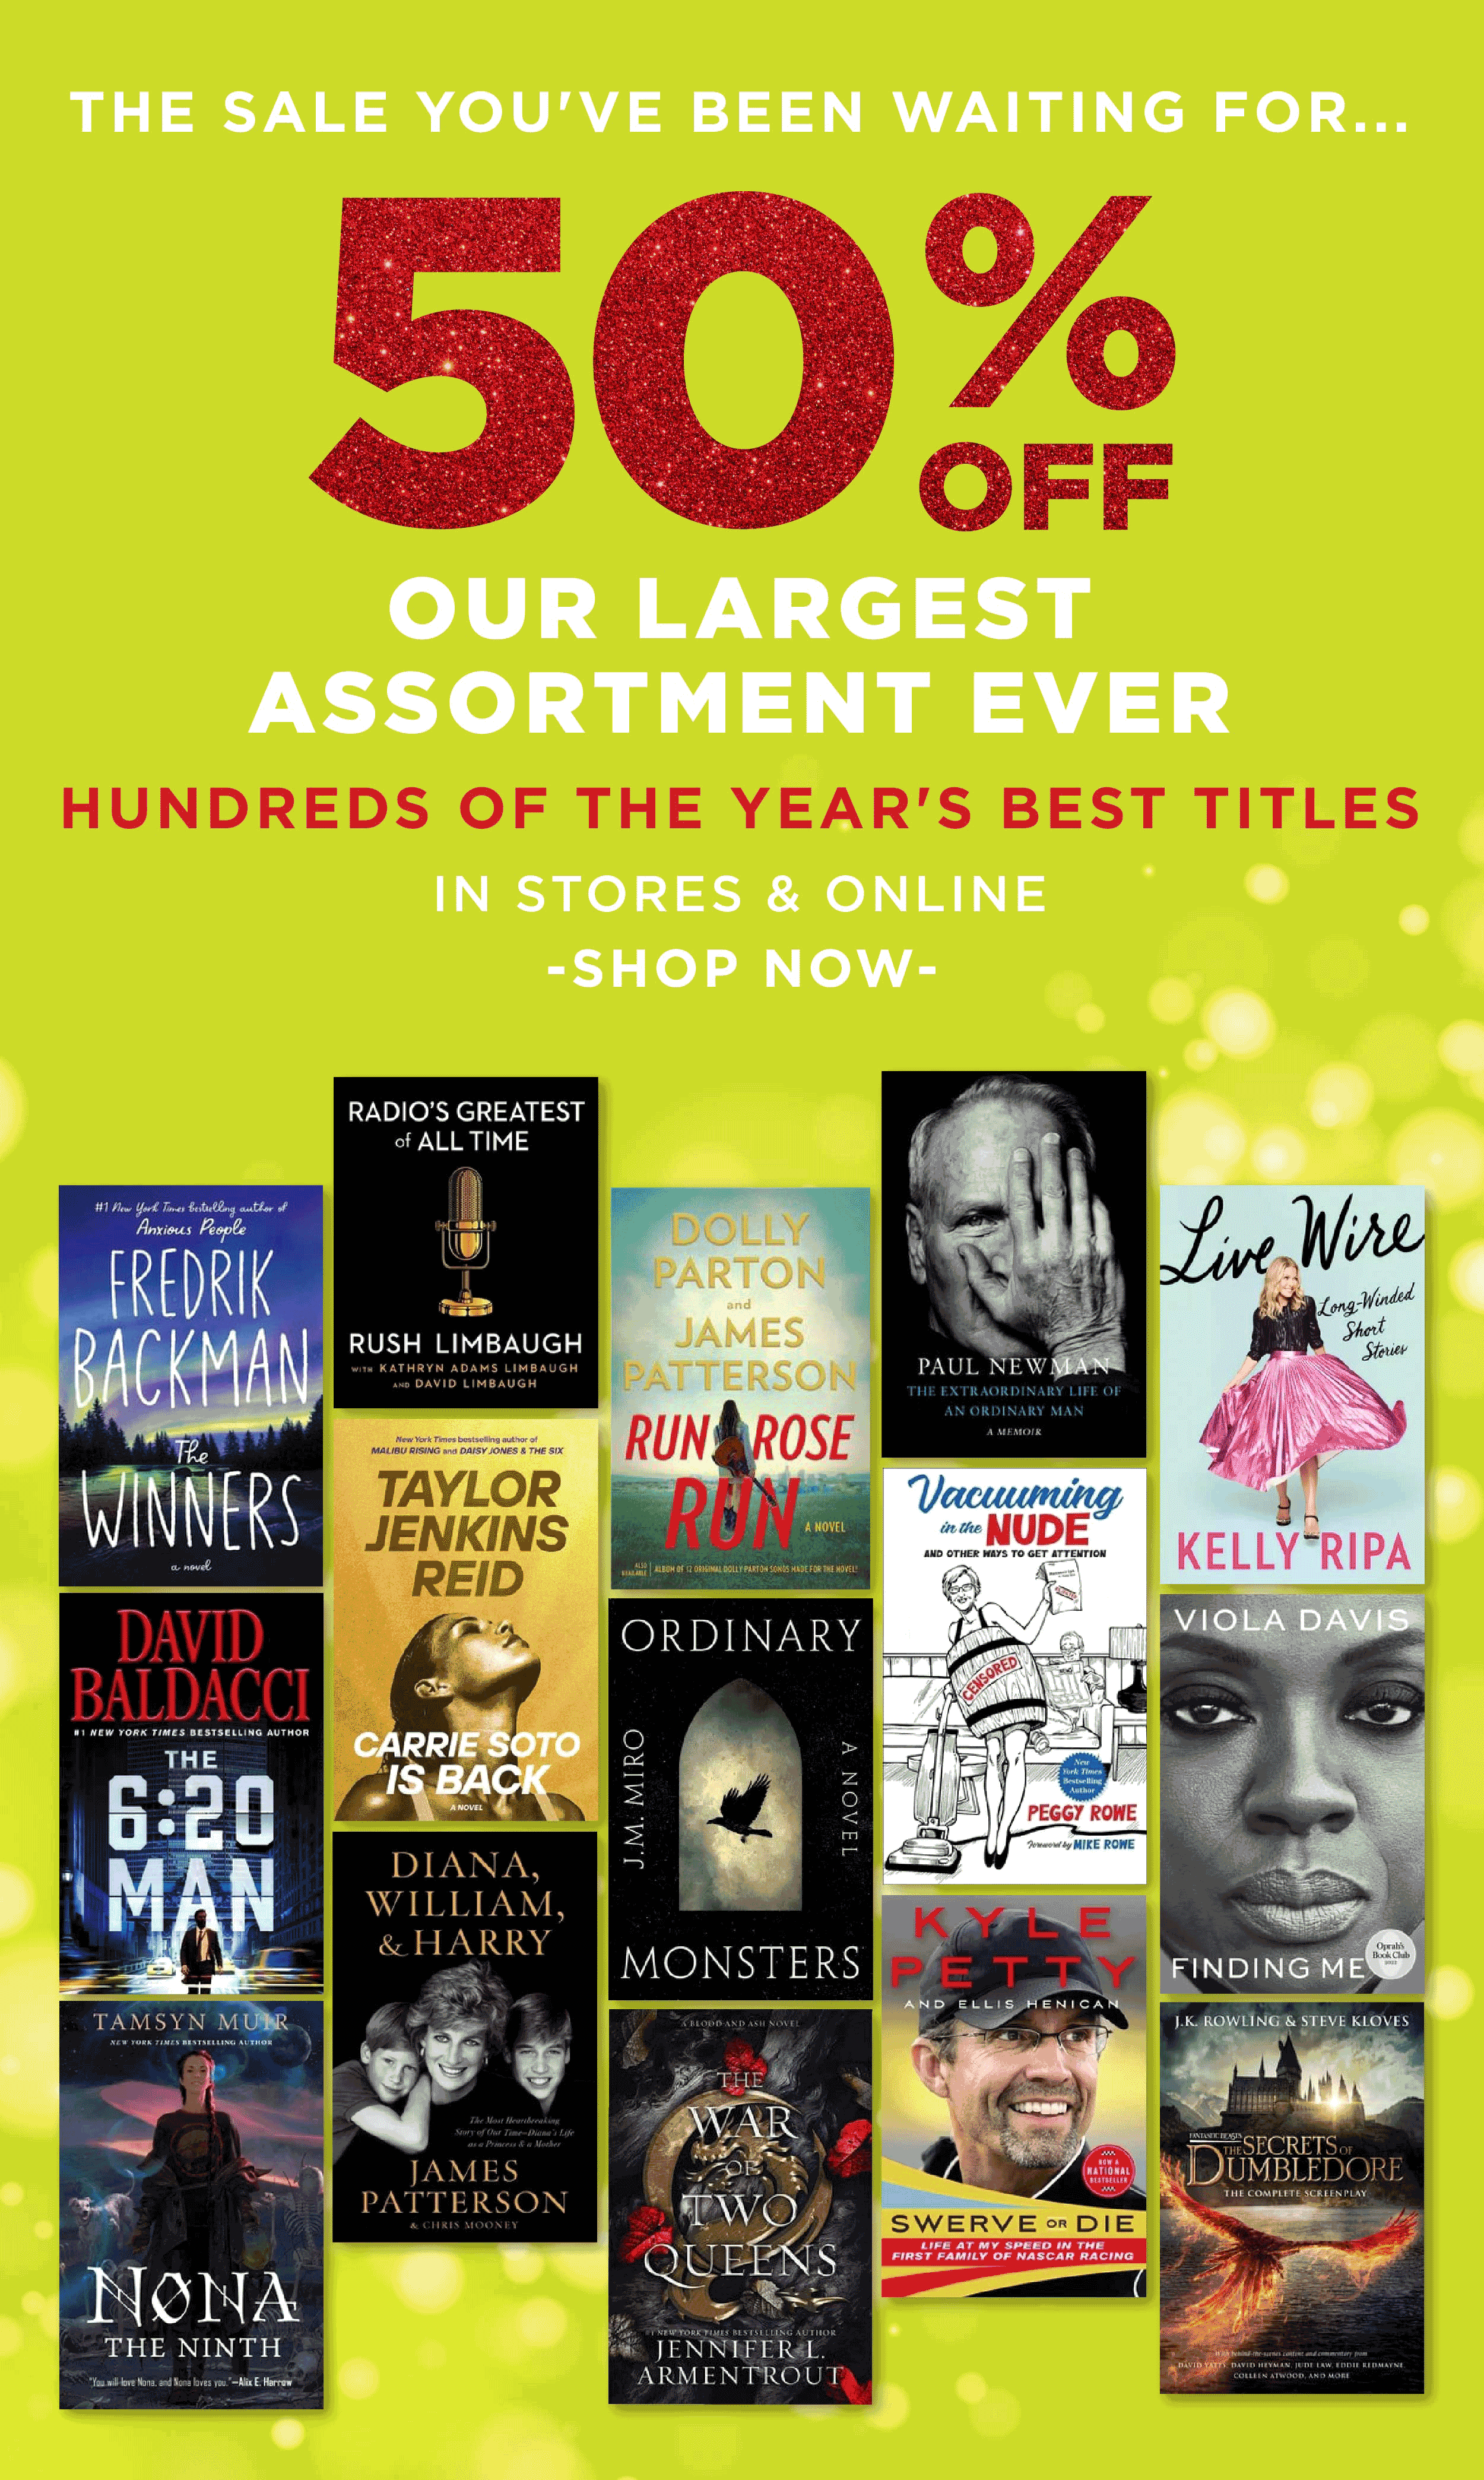 Save 50% on Our LARGEST Assortment of Books EVER! - Books A Million